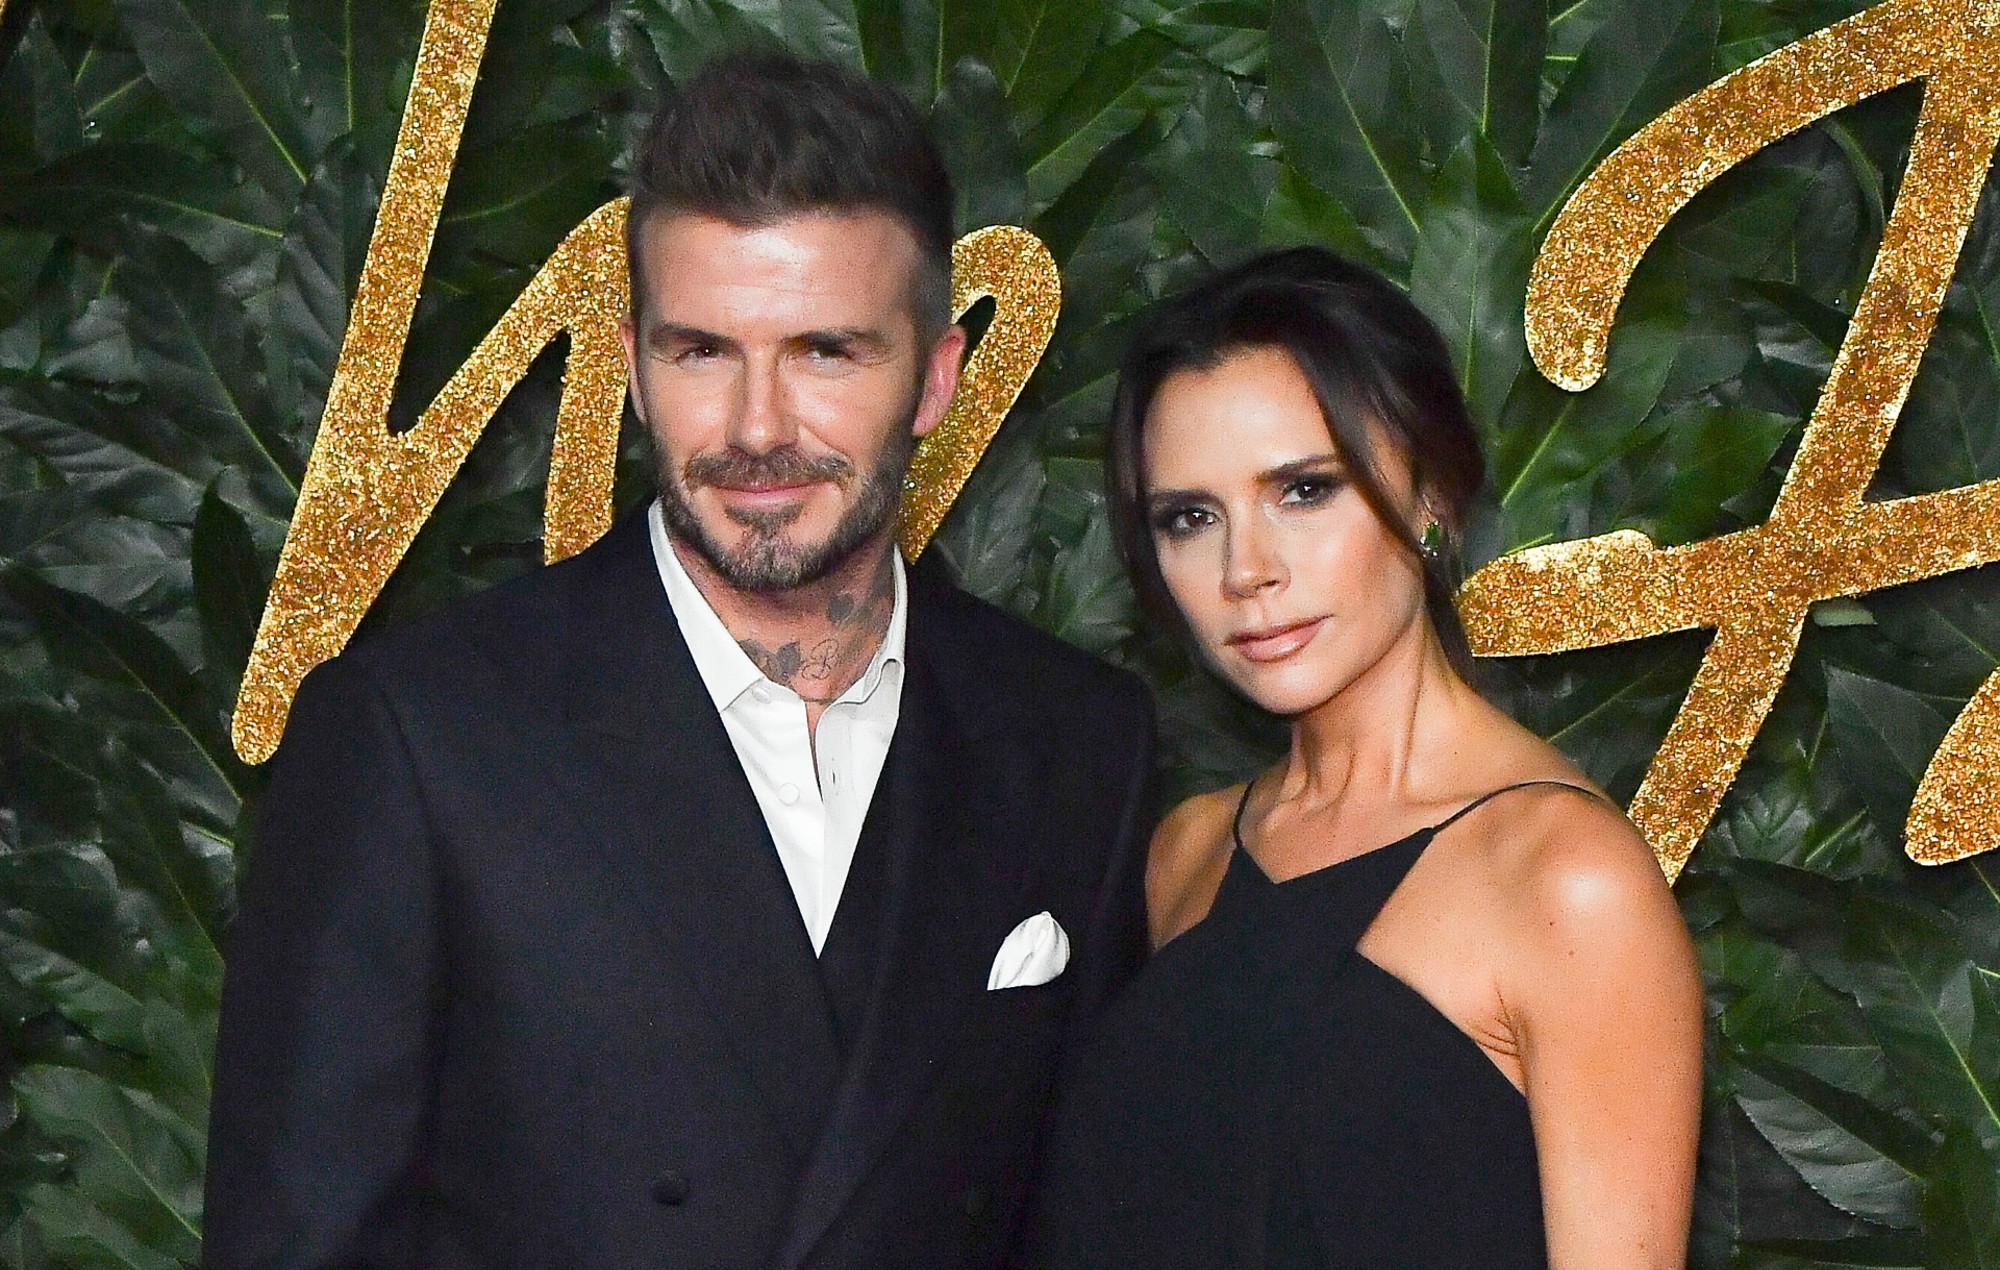 David Beckham calls out Victoria Beckham for claiming she was “working class”